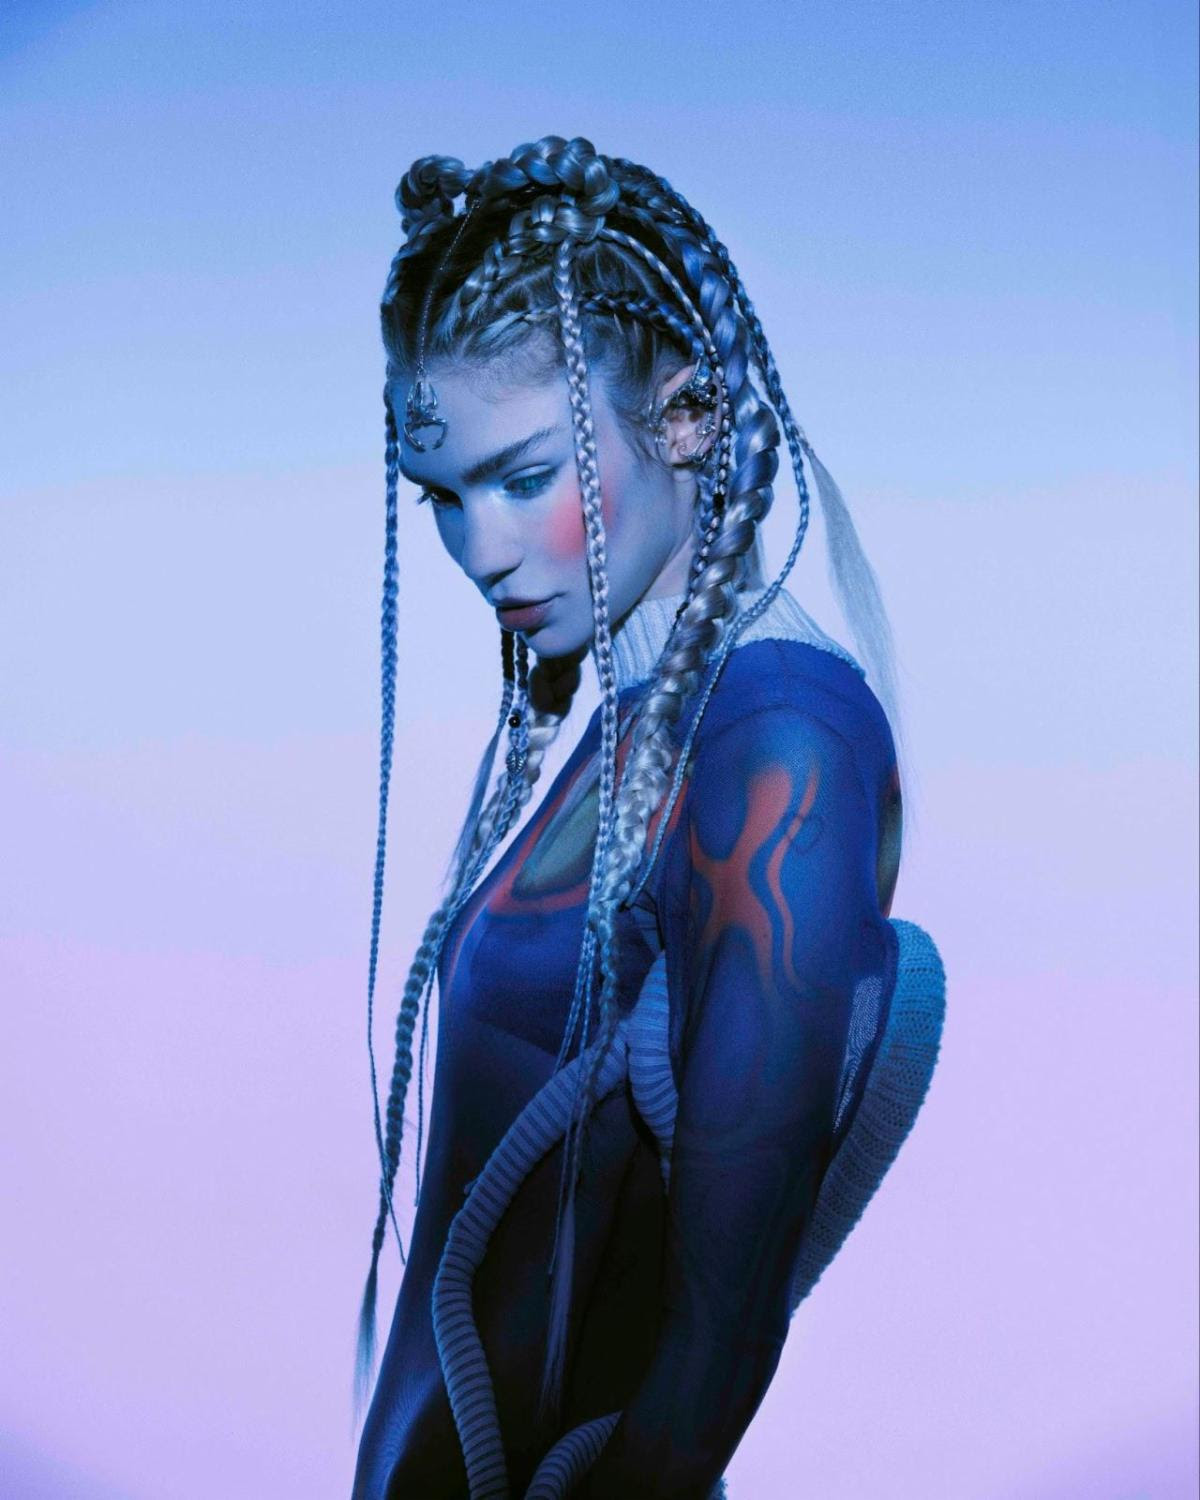 Grimes in ethereal allure, echoing the transcendent collaboration with Sevdaliza in 'Nothing Lasts Forever'.